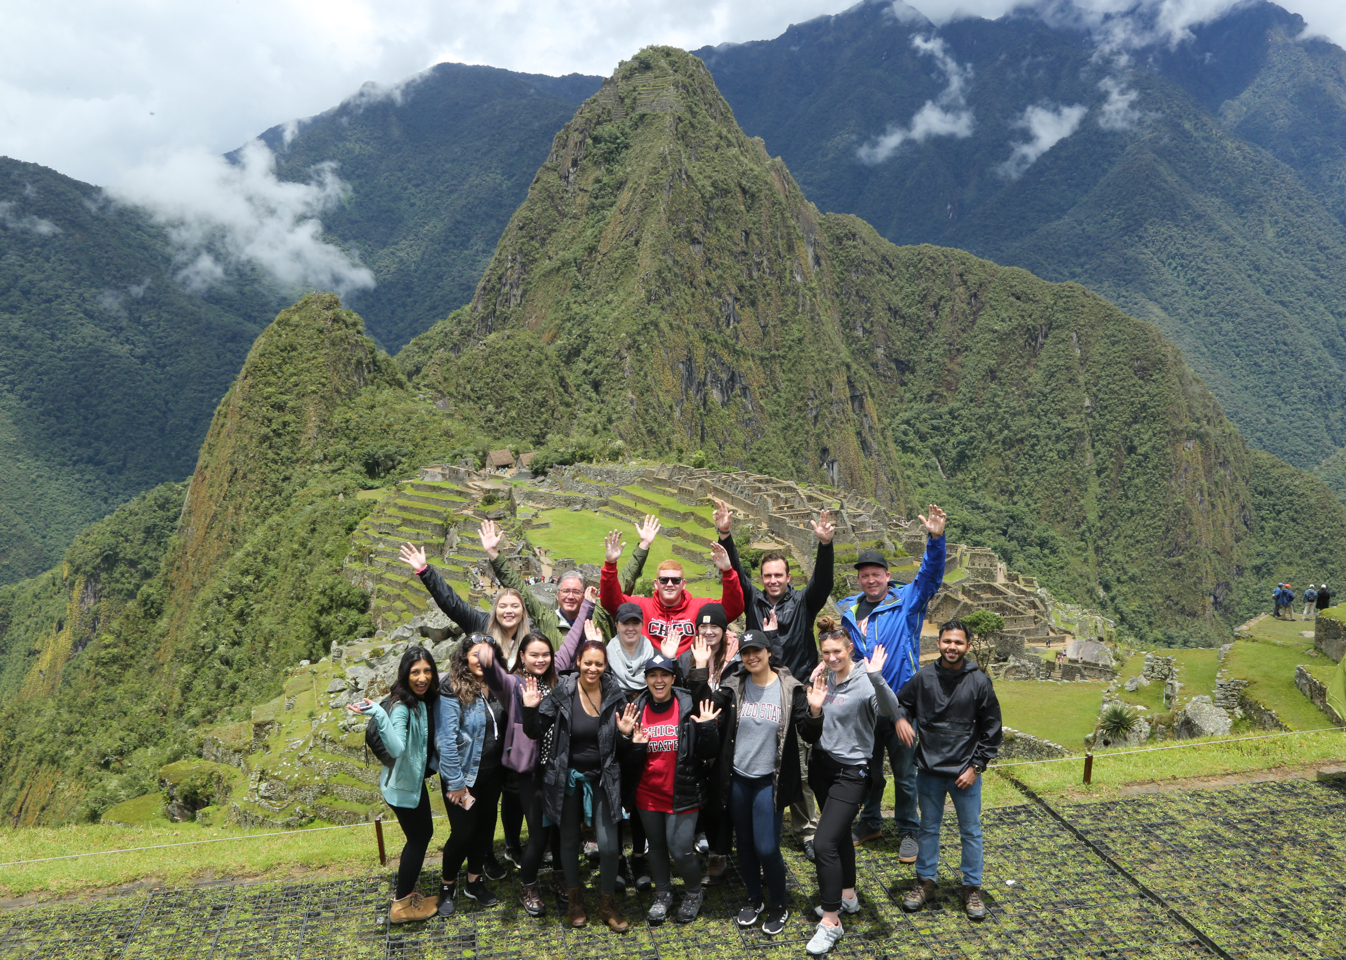 Students pose at the top of Macchu Picchu.